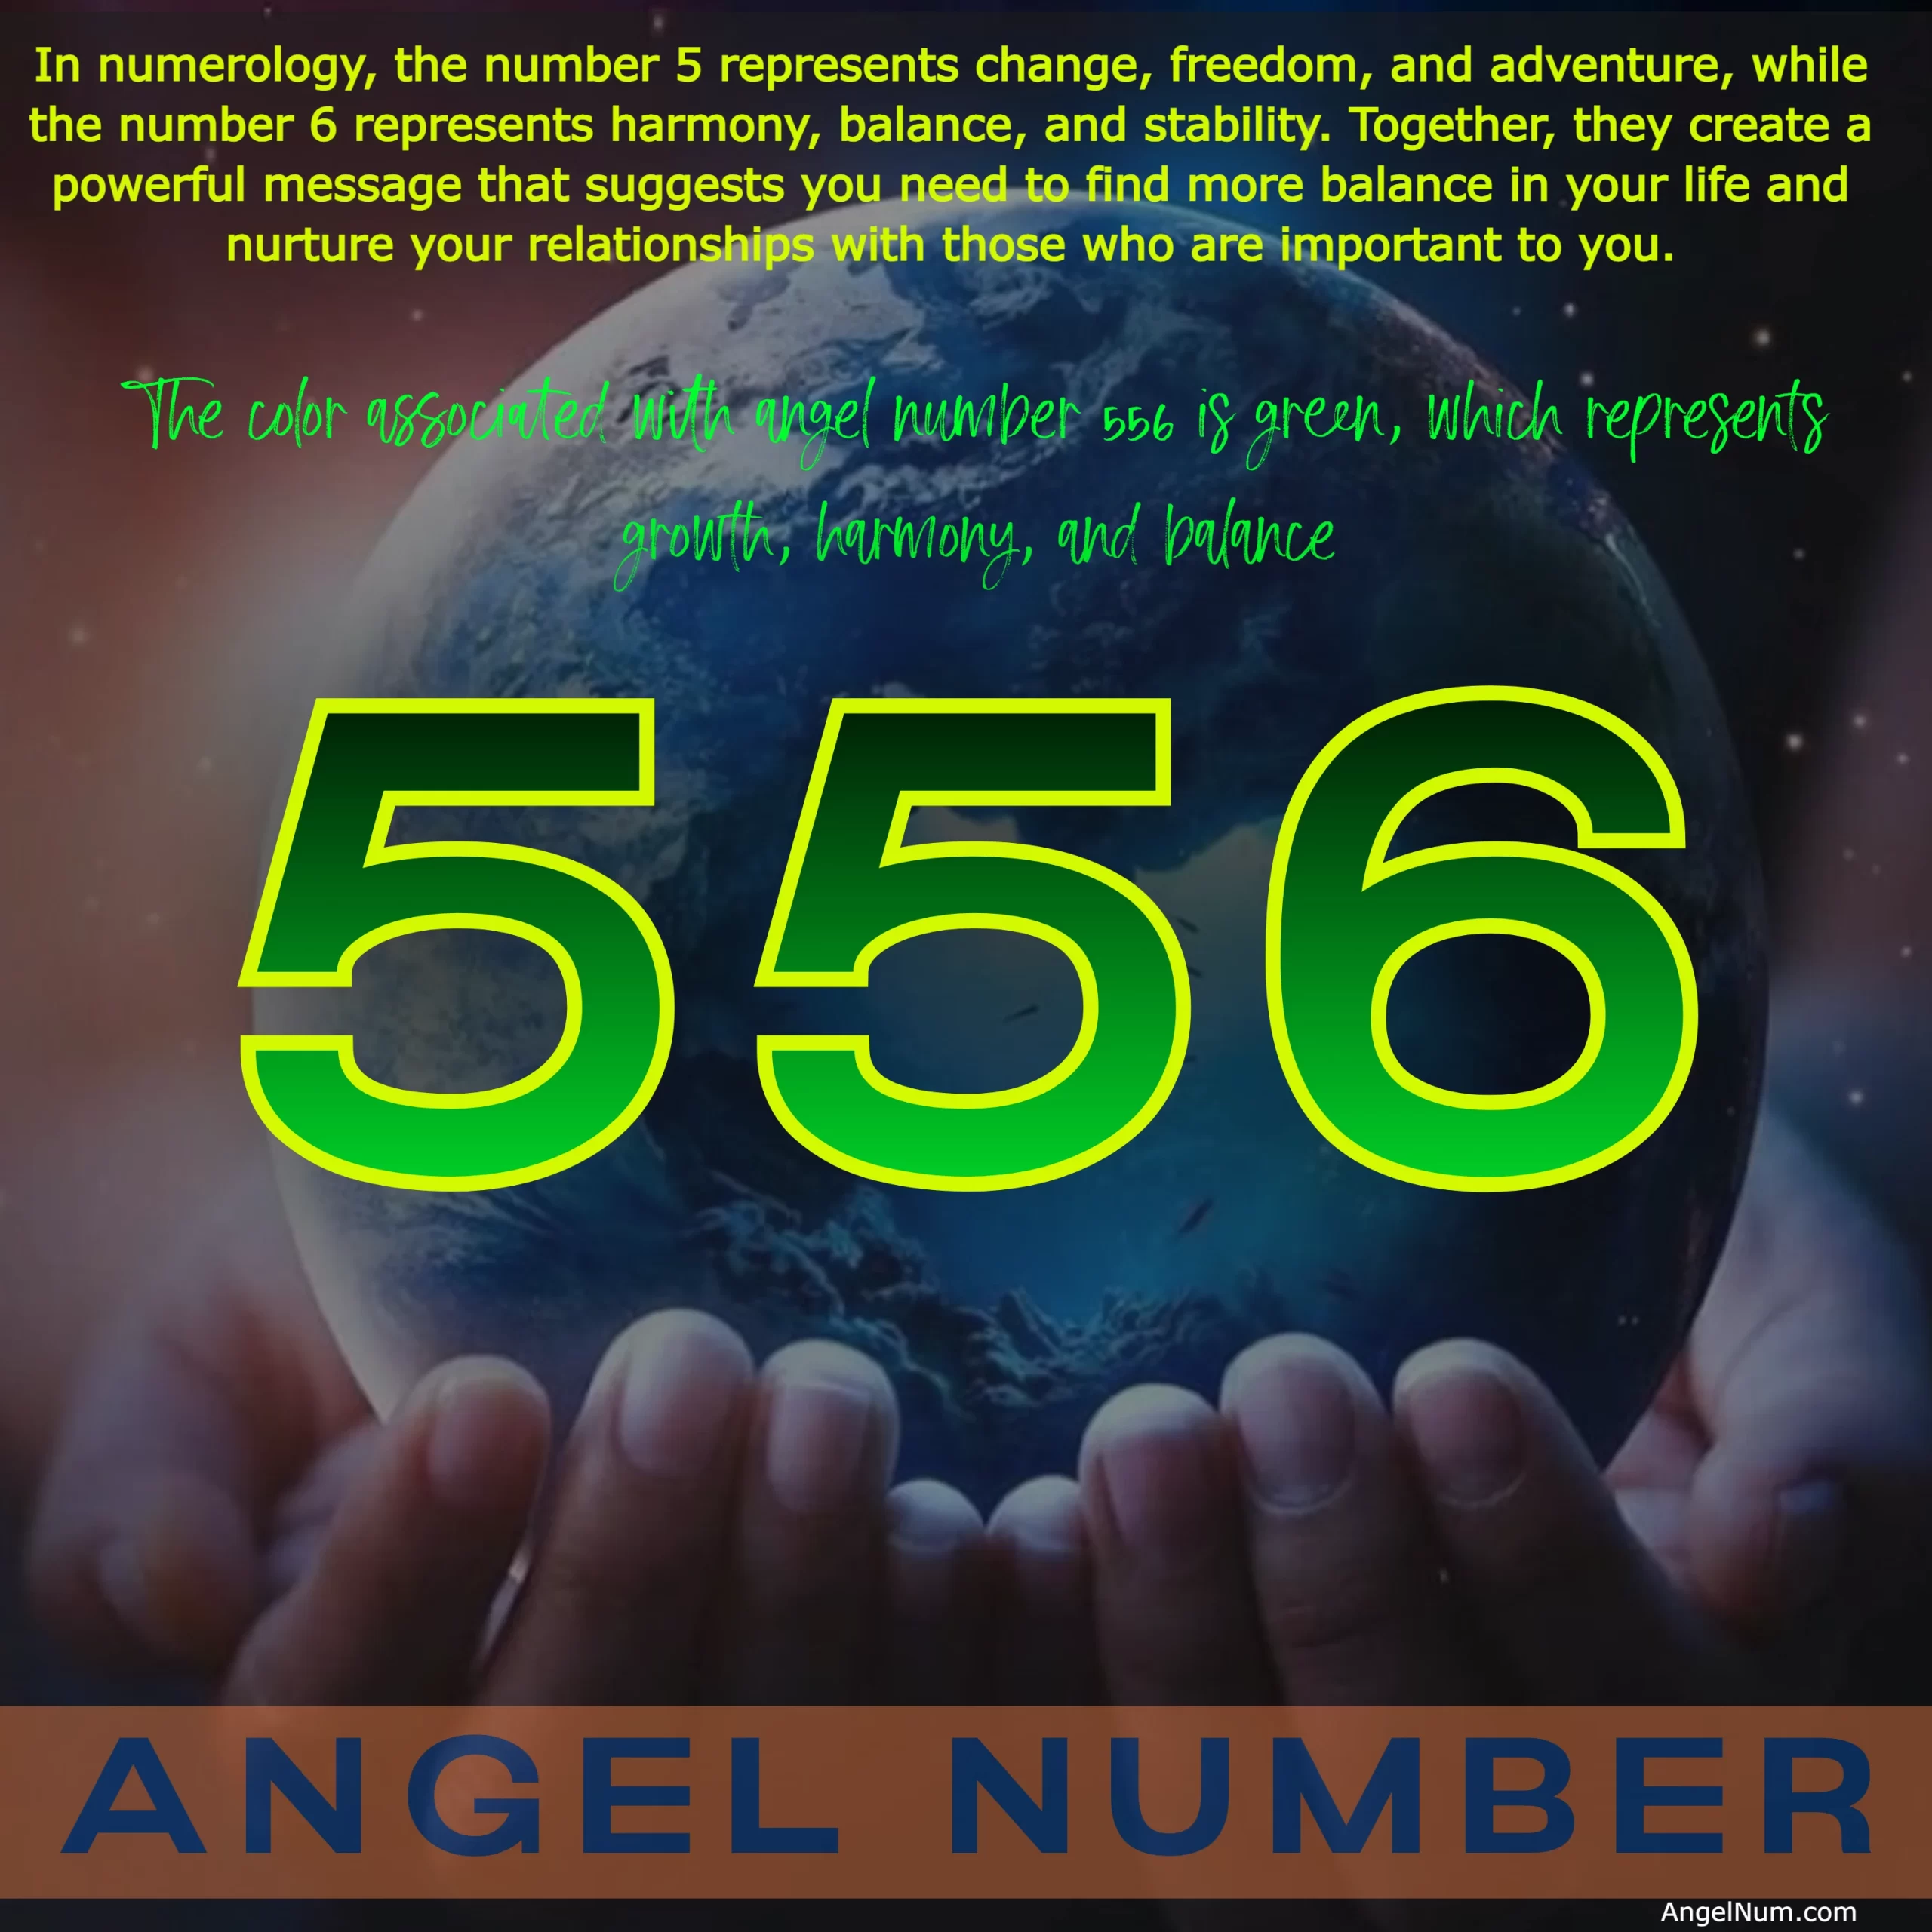 Angel Number 556: Embracing Change and Finding Balance